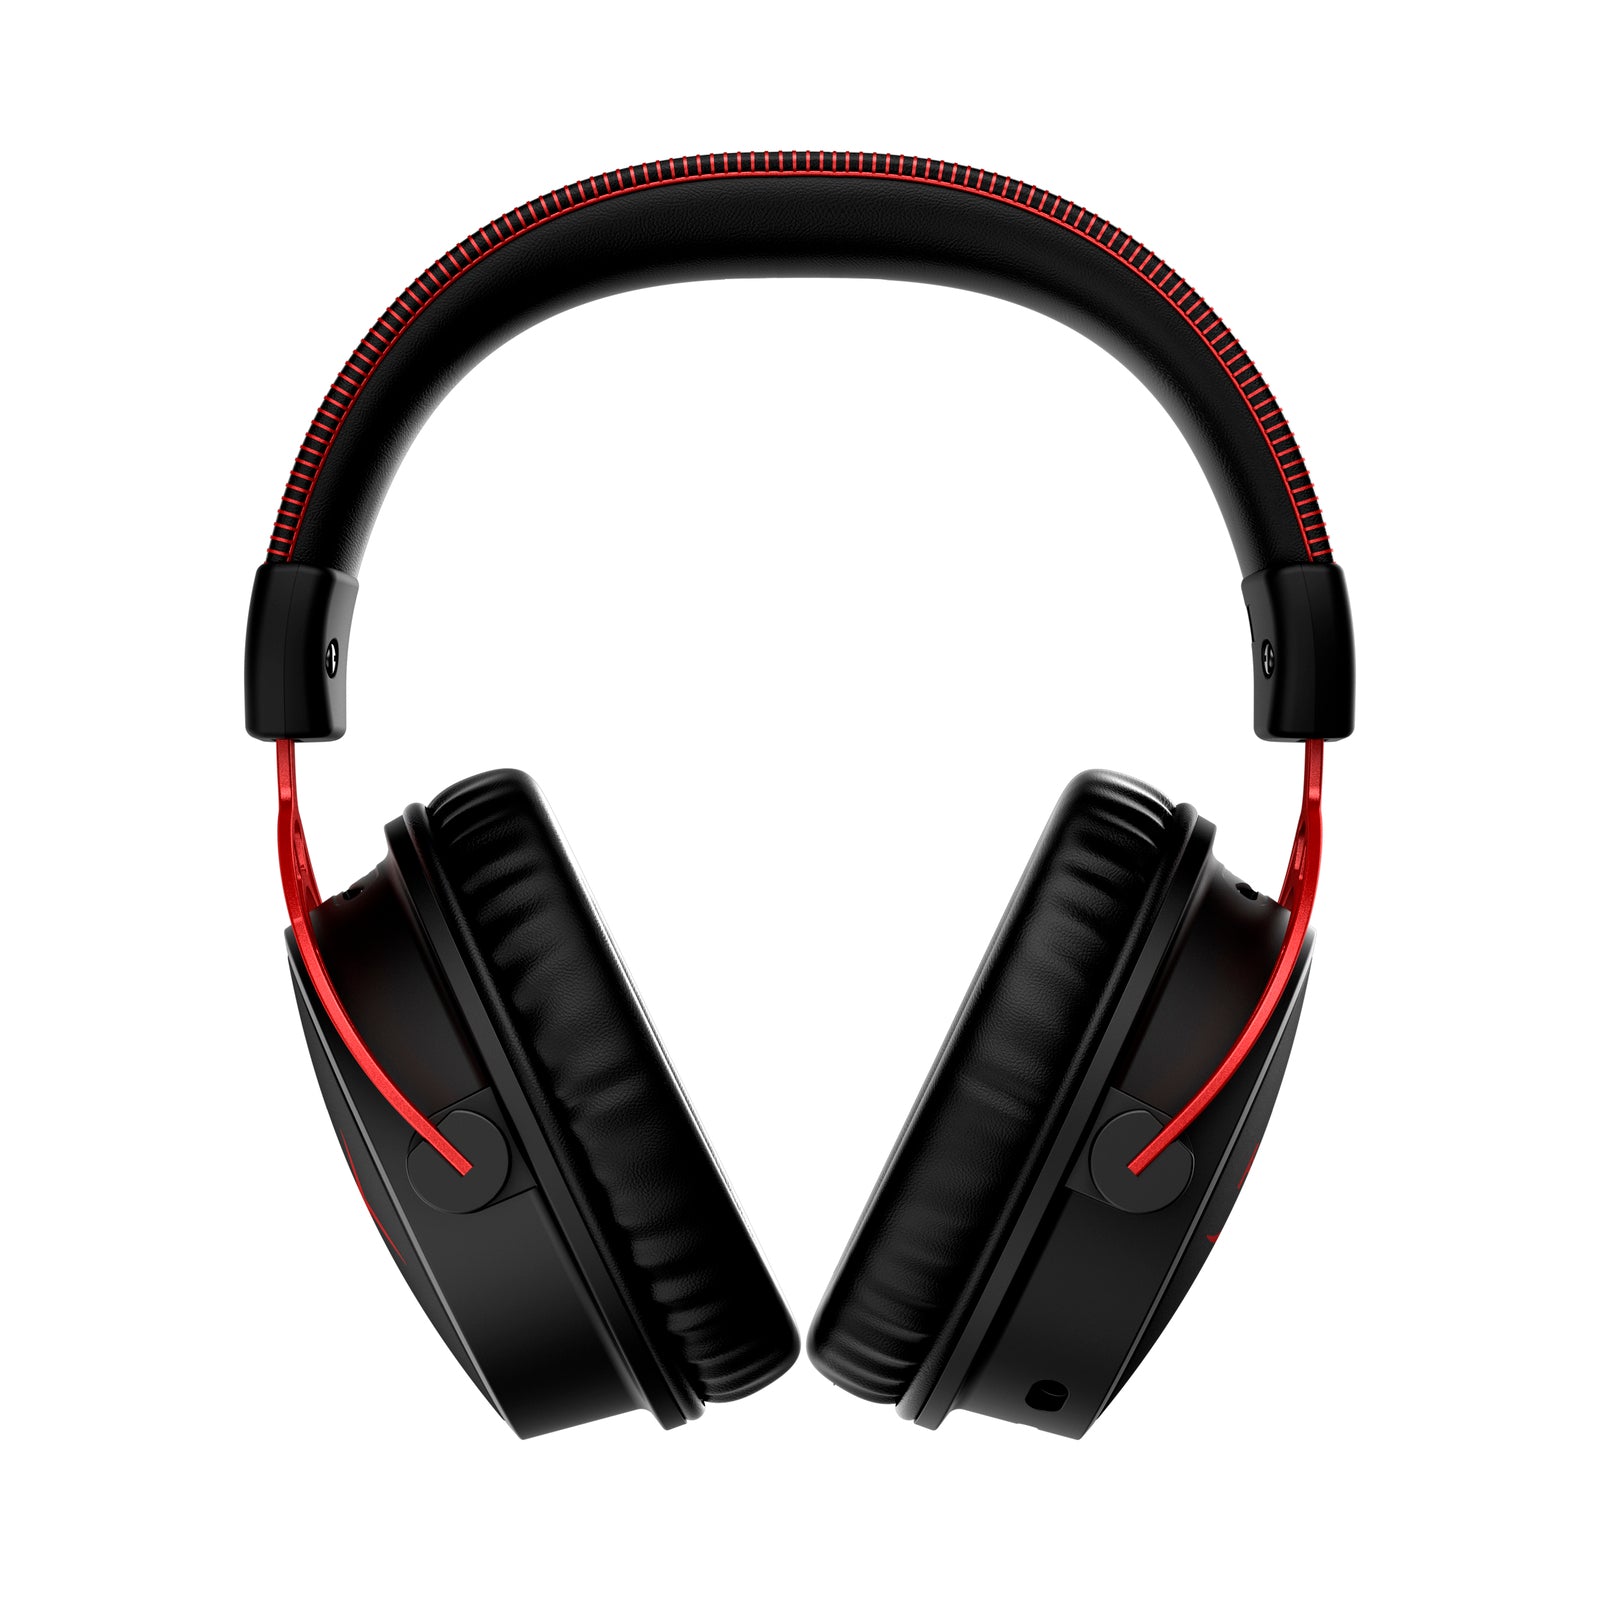 HyperX Cloud Alpha Wireless Review: A Gaming Headset With